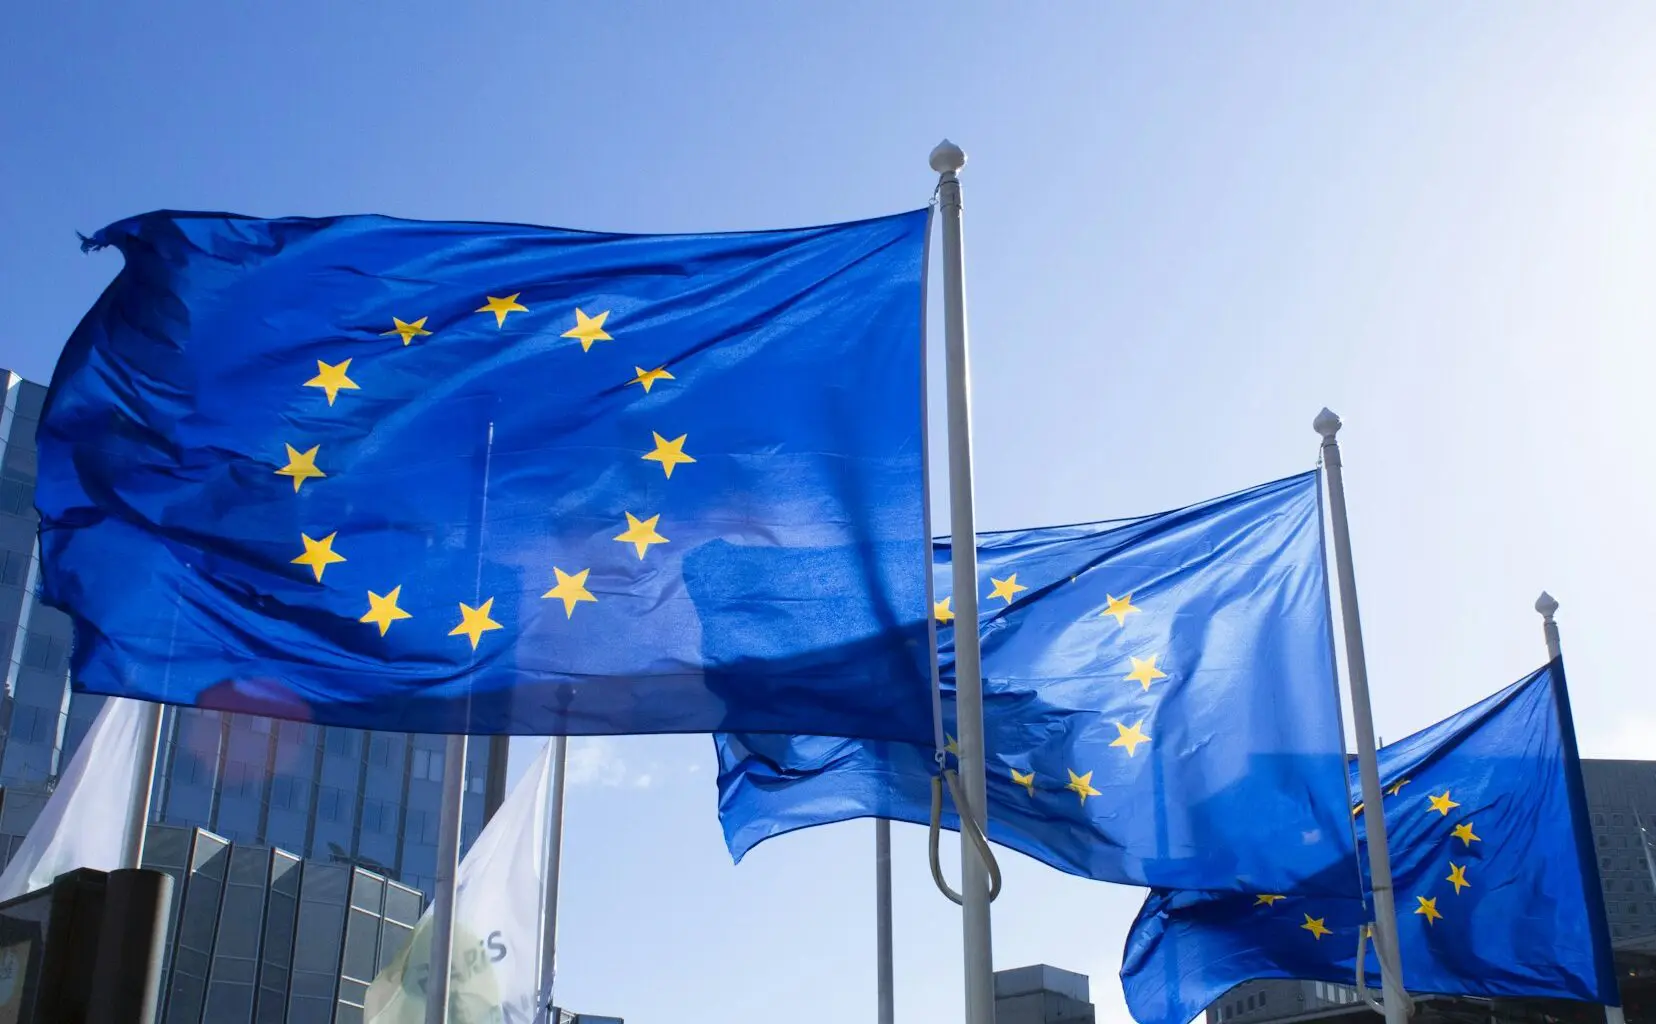 Three European Union flags flutter in the wind against a clear blue sky, with modern office buildings in the background. The flags are blue with a circle of twelve gold stars, symbolizing unity and harmony among the peoples of Europe.